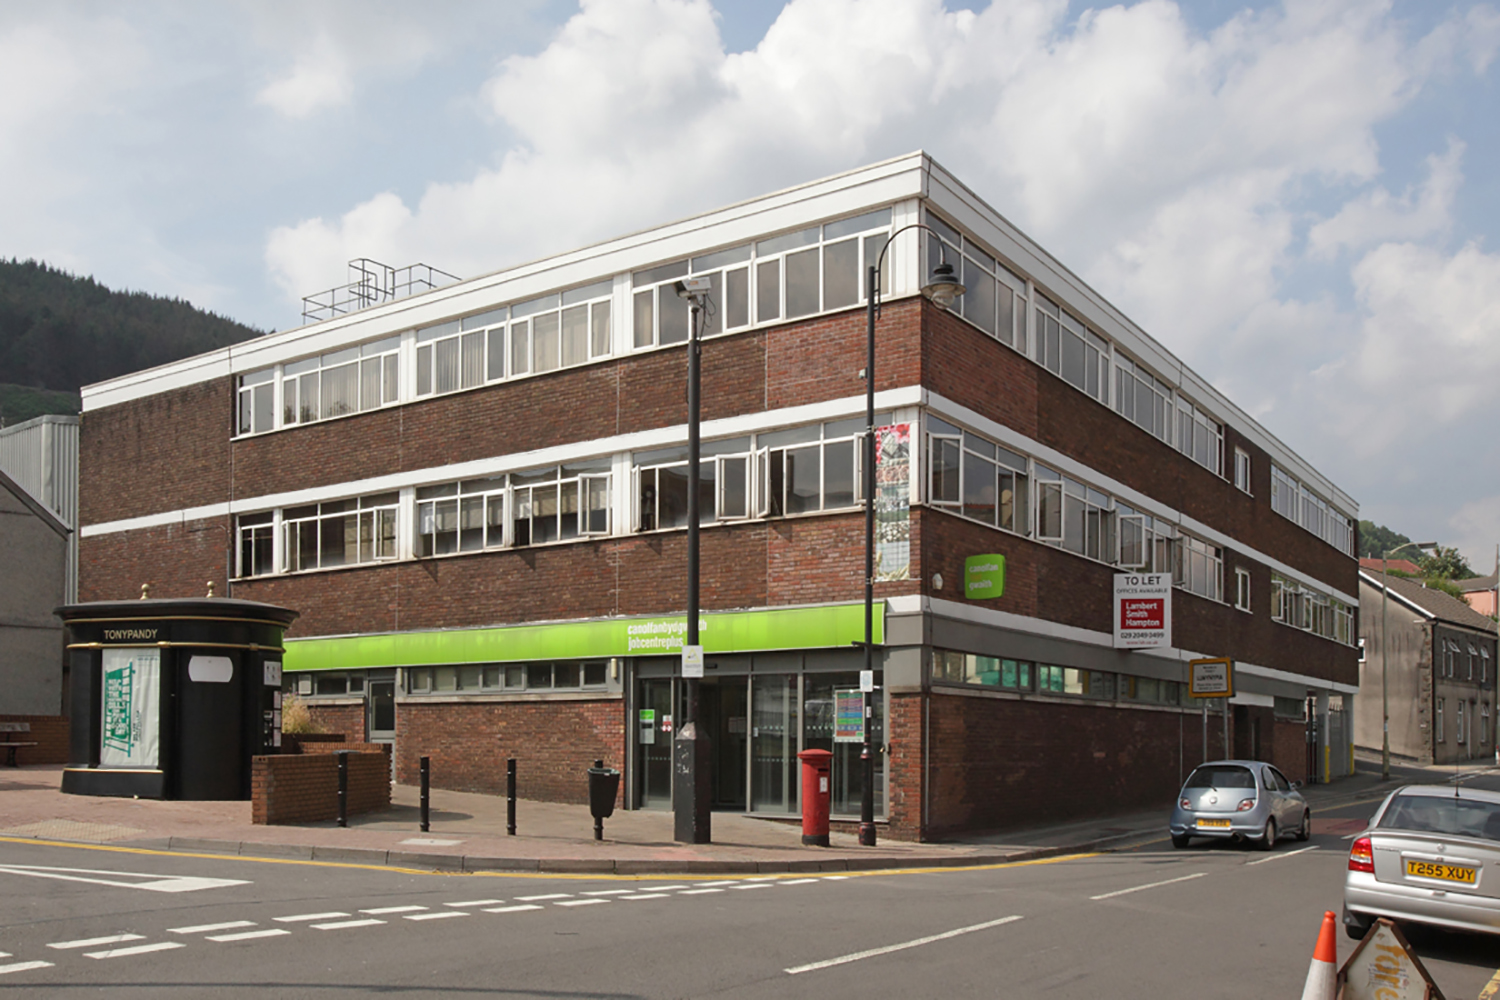 The Orchards, Office, Industrial, Cardiff, Estate, Agents, Commercial.